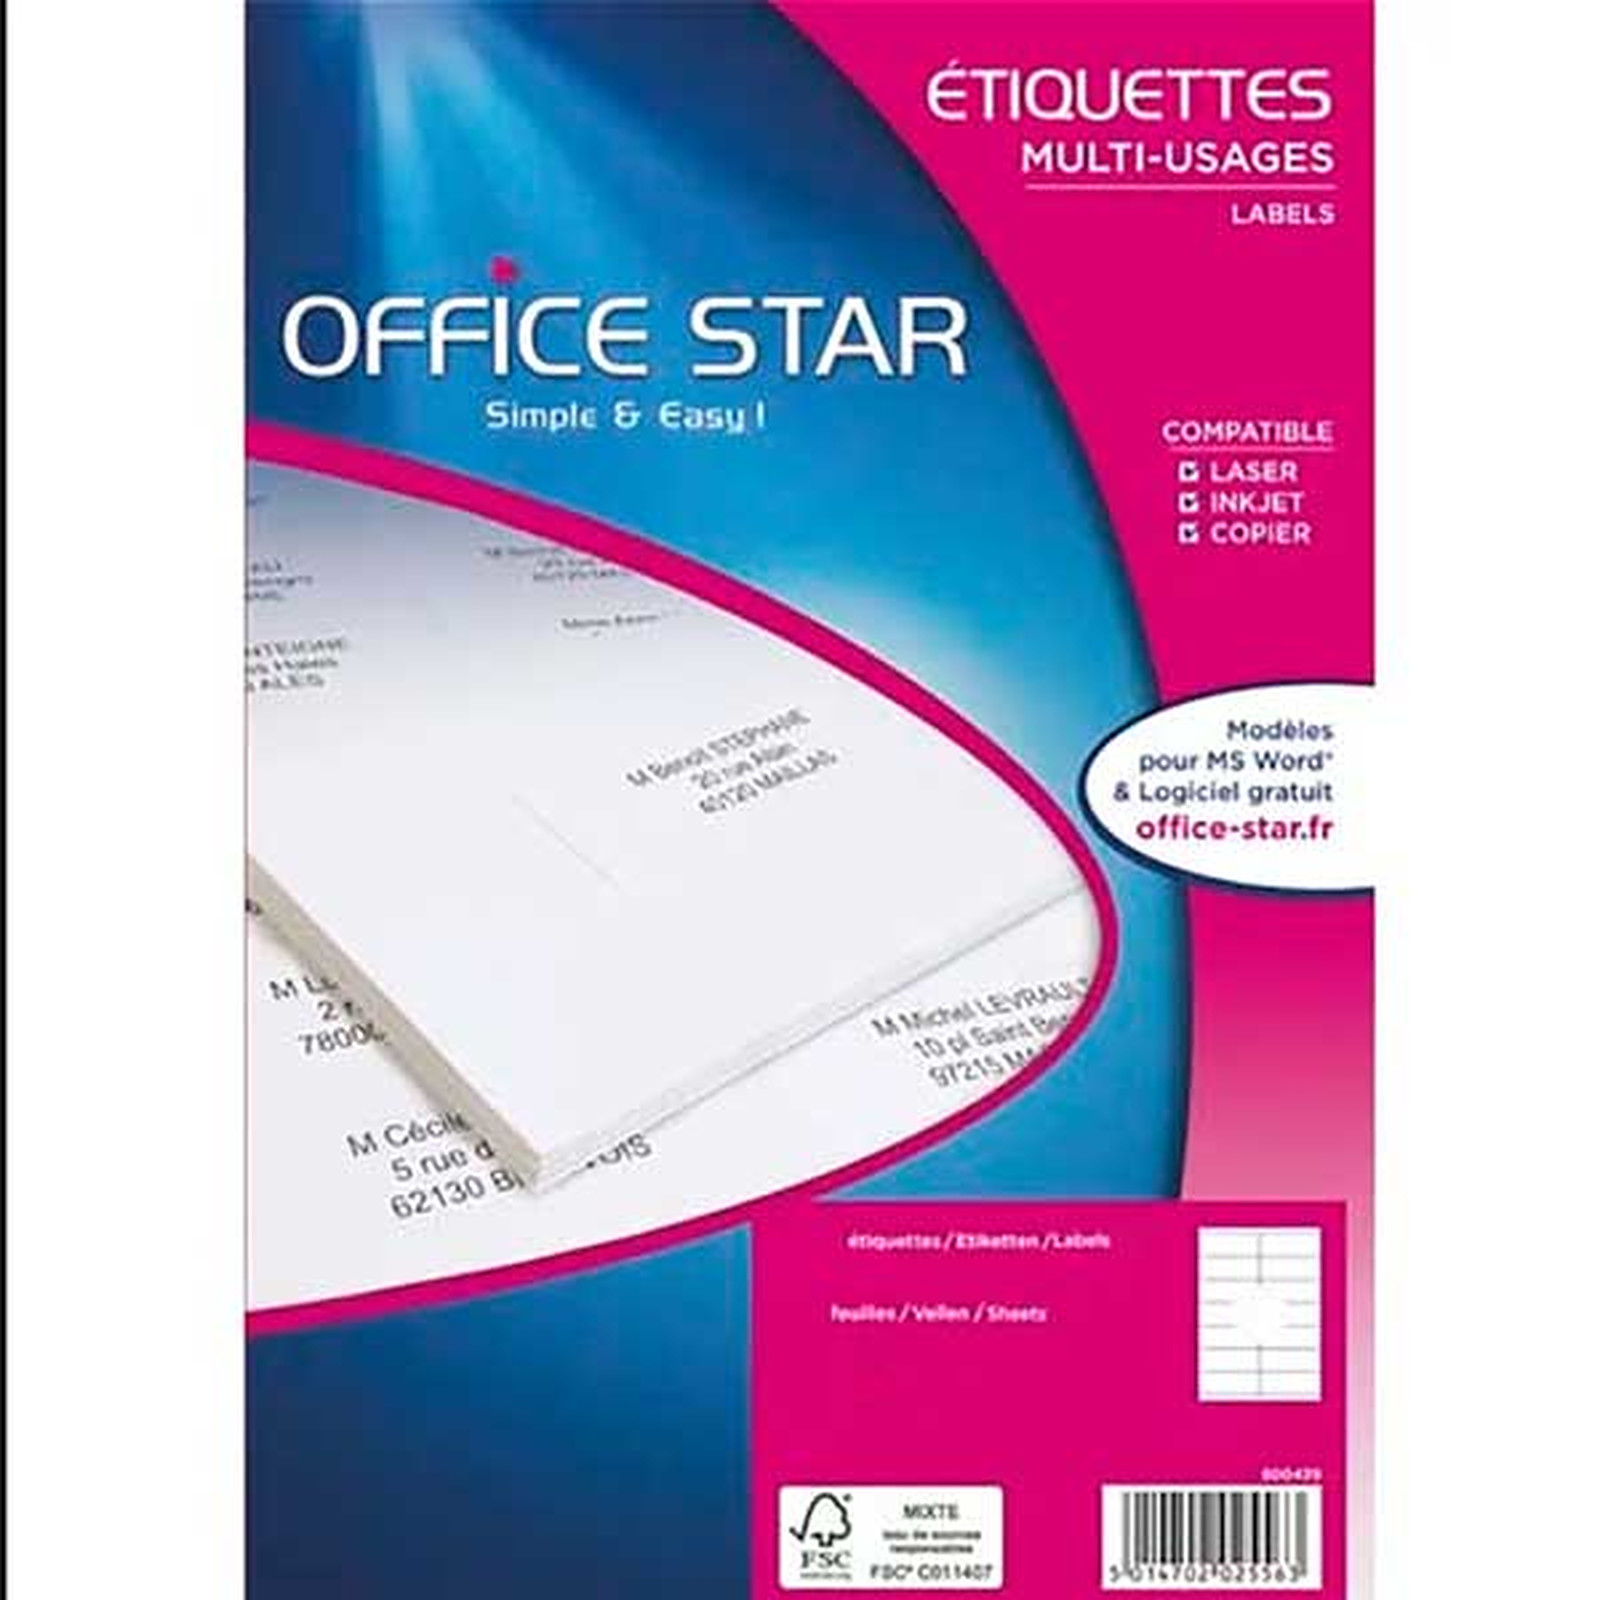 Office Star Etiquettes multi-usage blanches 38.1 x 21.2 mm x 6500 - Etiquette Office Star